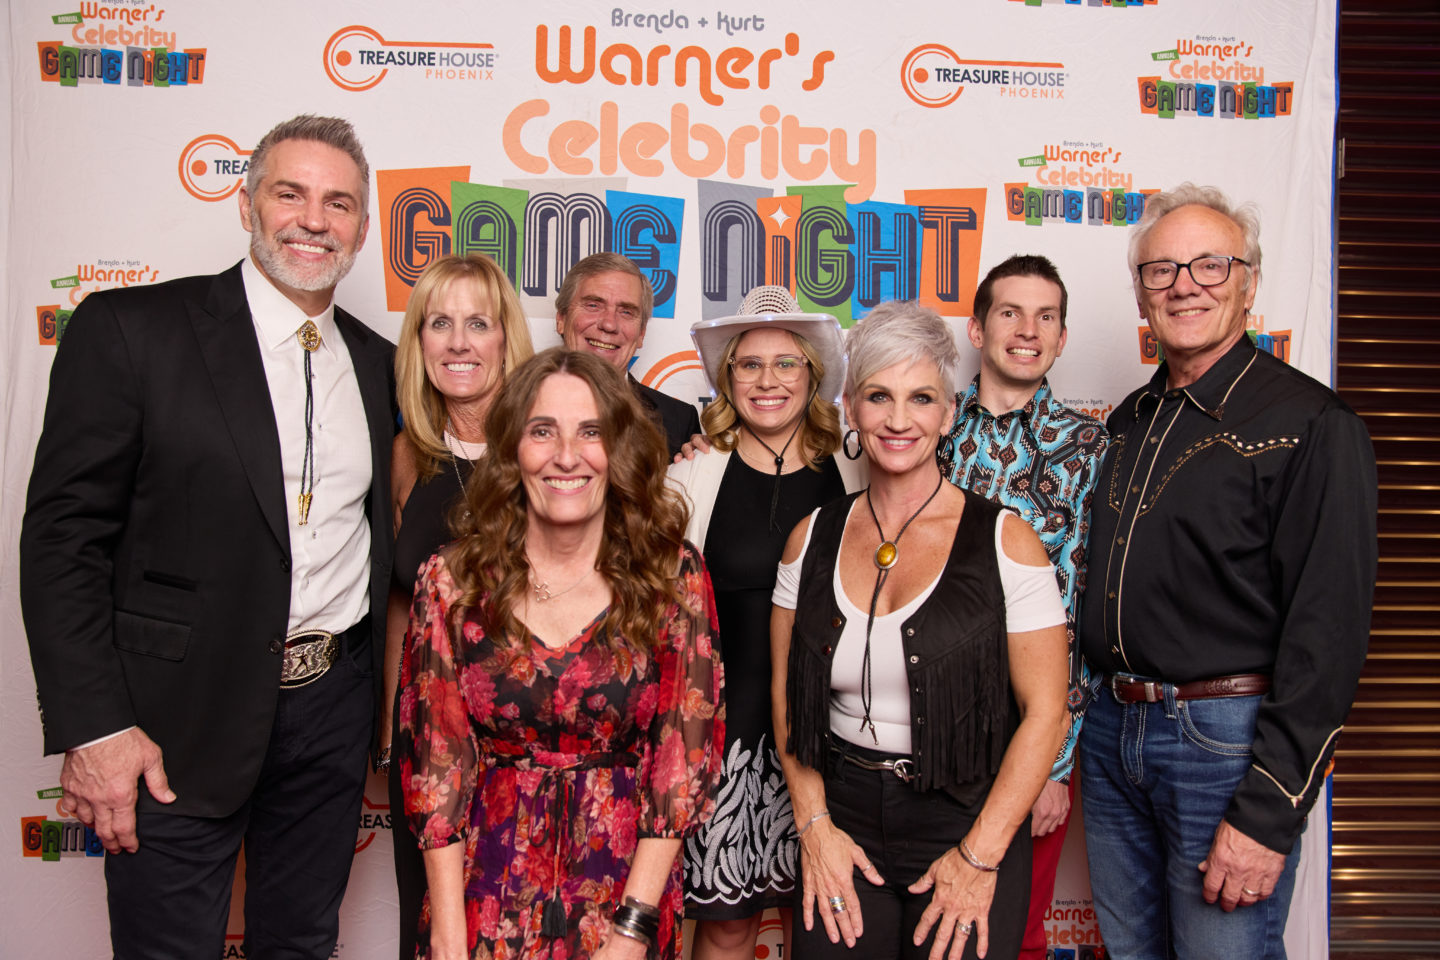 A group of people pose with Kurt and Brenda warner in front of the celebrity game night logo